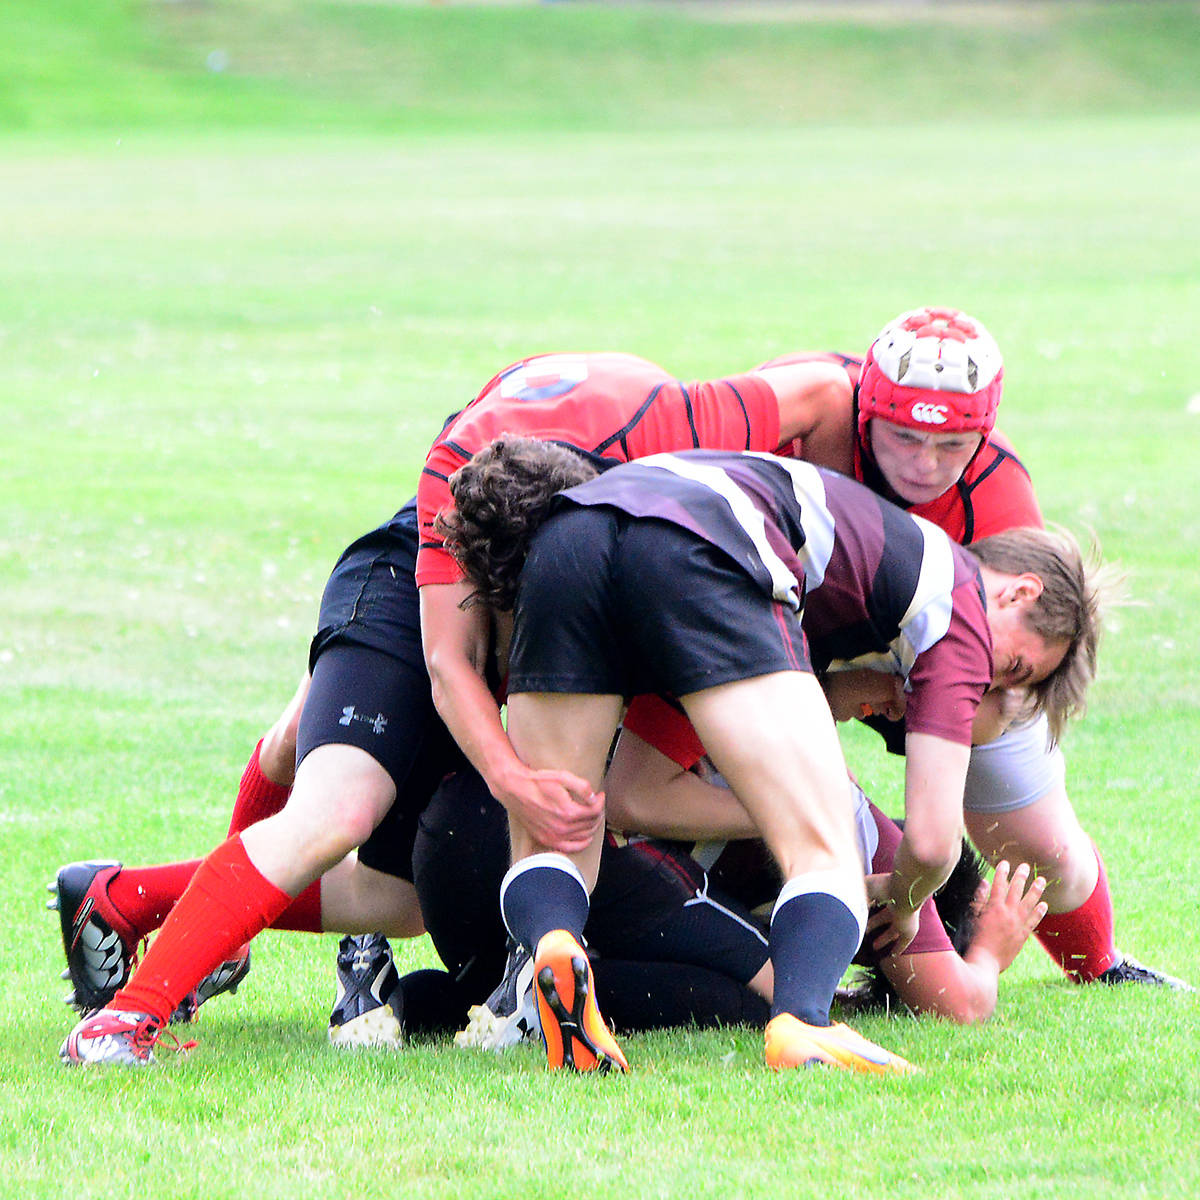 11978237_web1_180524-NTC-Rugby0042Ruck